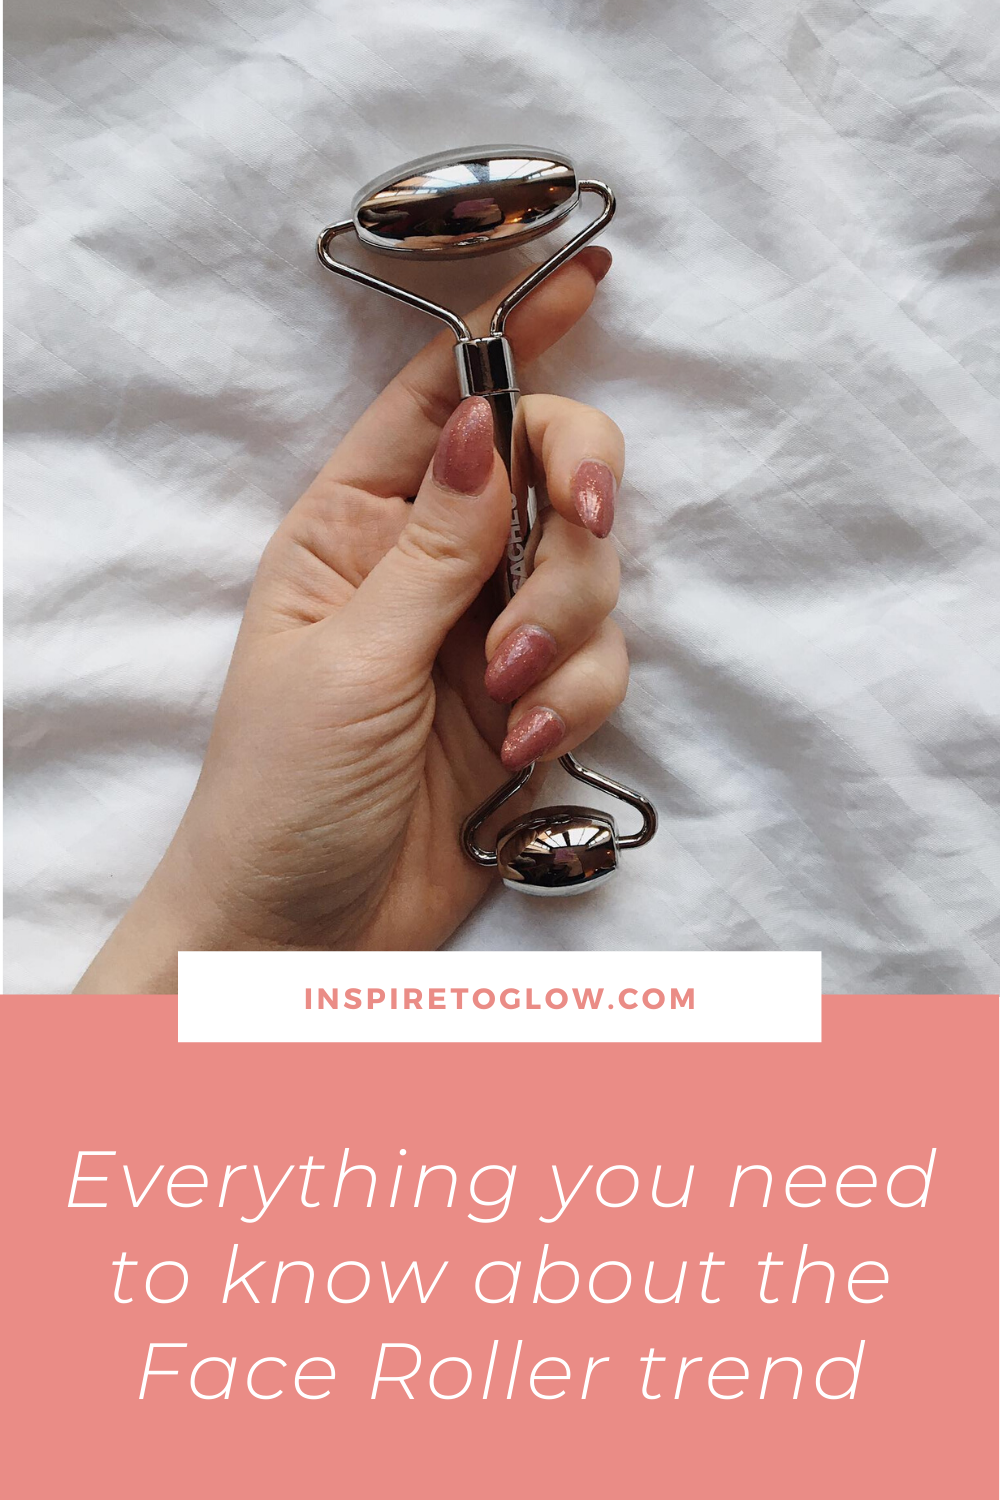 Skincare Blog - Everything you need to know about the Face Roller Trend - Skincare Tool Stainless Steel - Inspire to Glow